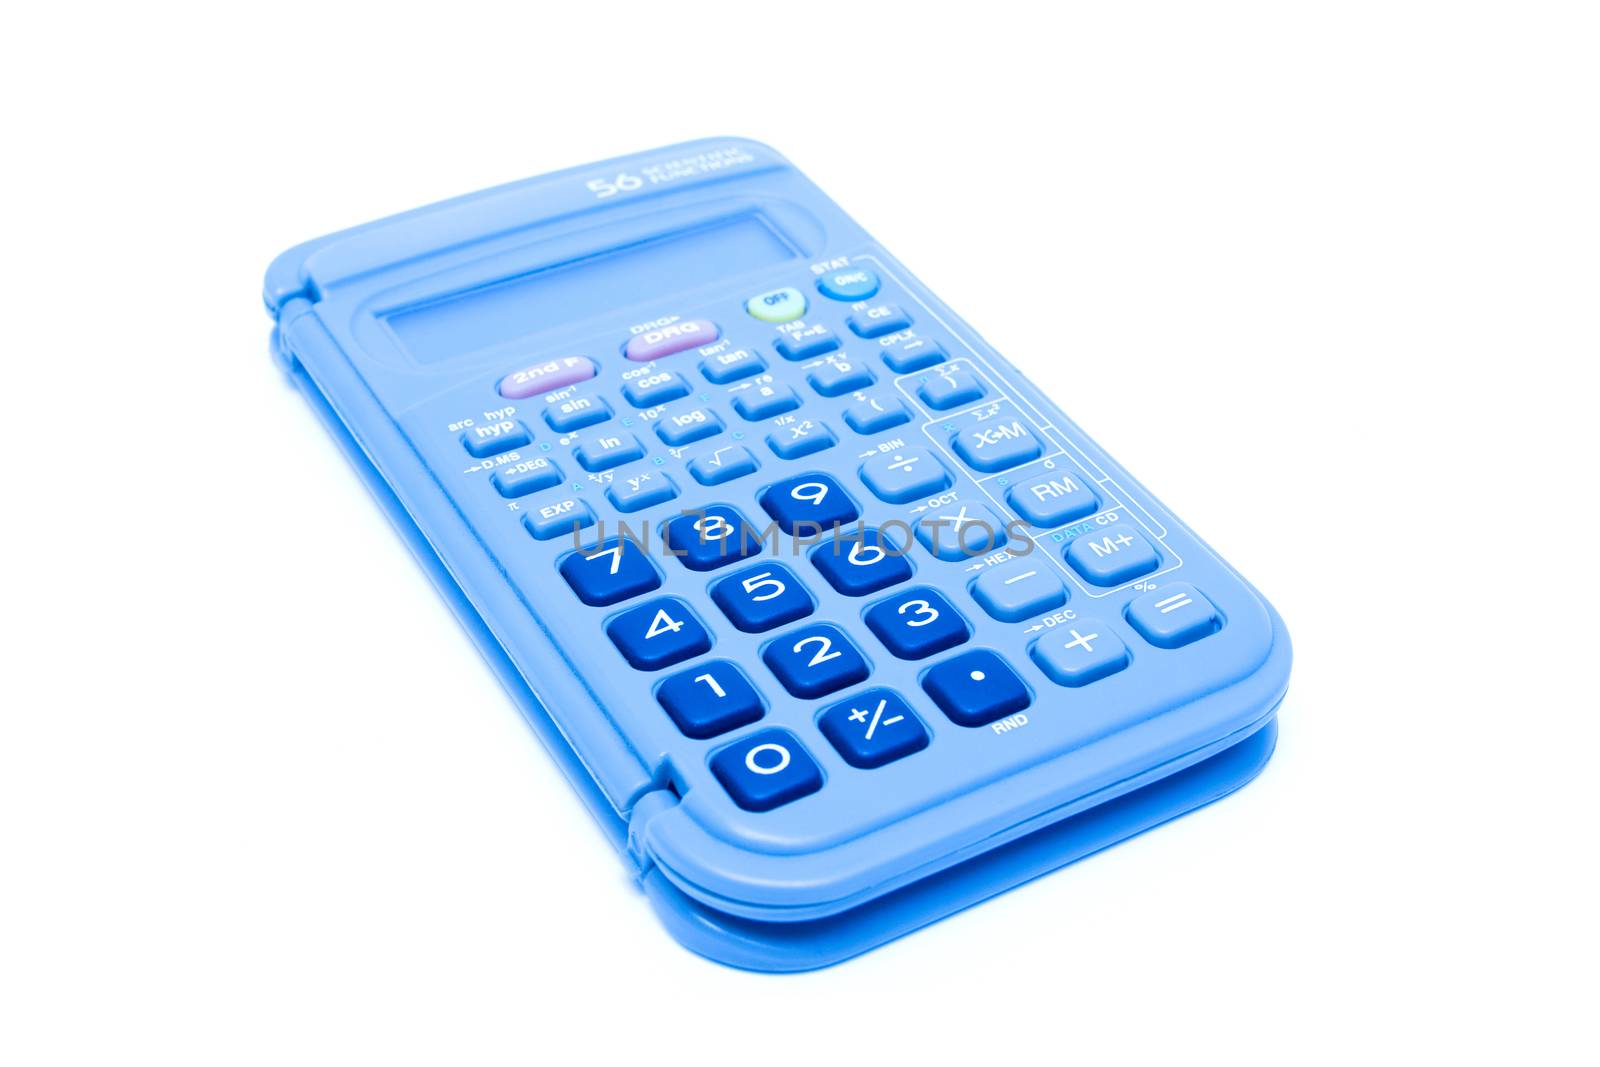 Calculator isolated on white background by myyaym